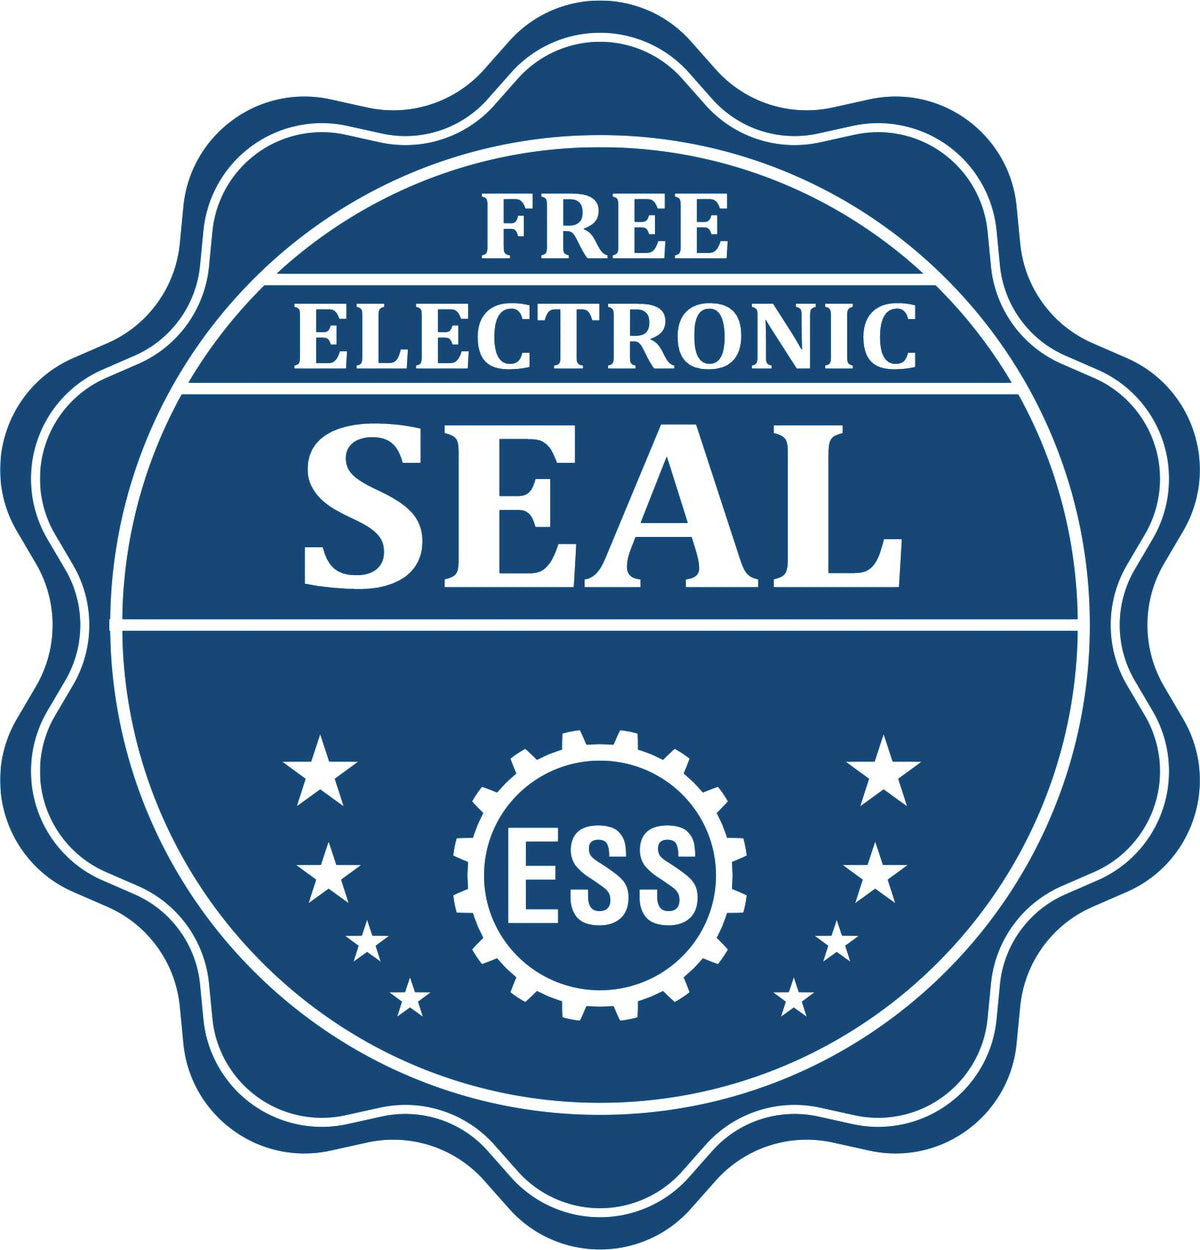 A badge showing a free electronic seal for the Hybrid Pennsylvania Architect Seal with stars and the ESS gear on the emblem.